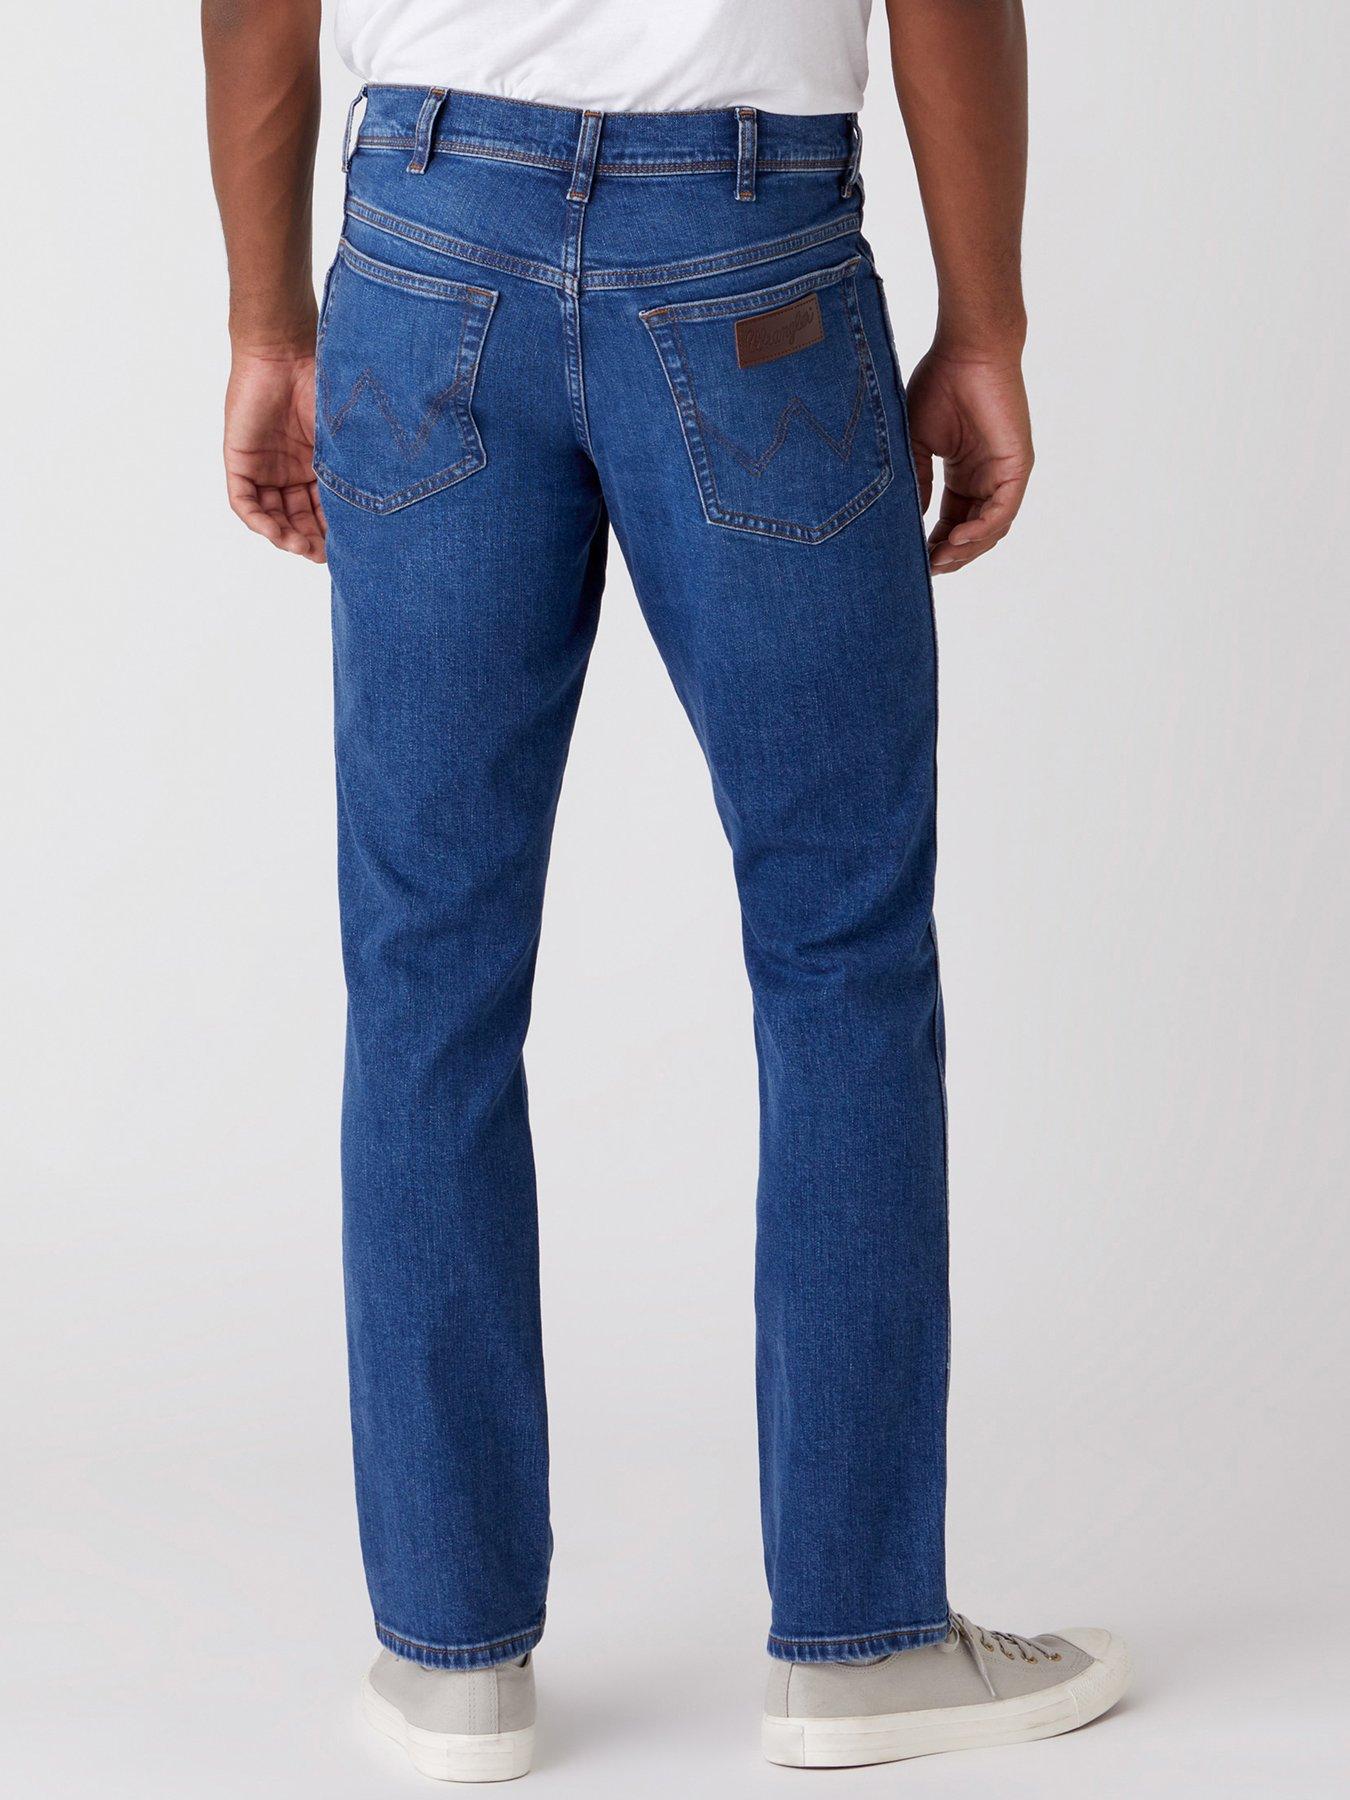 Jeans Texas Authentic Slim Jeans - Game On